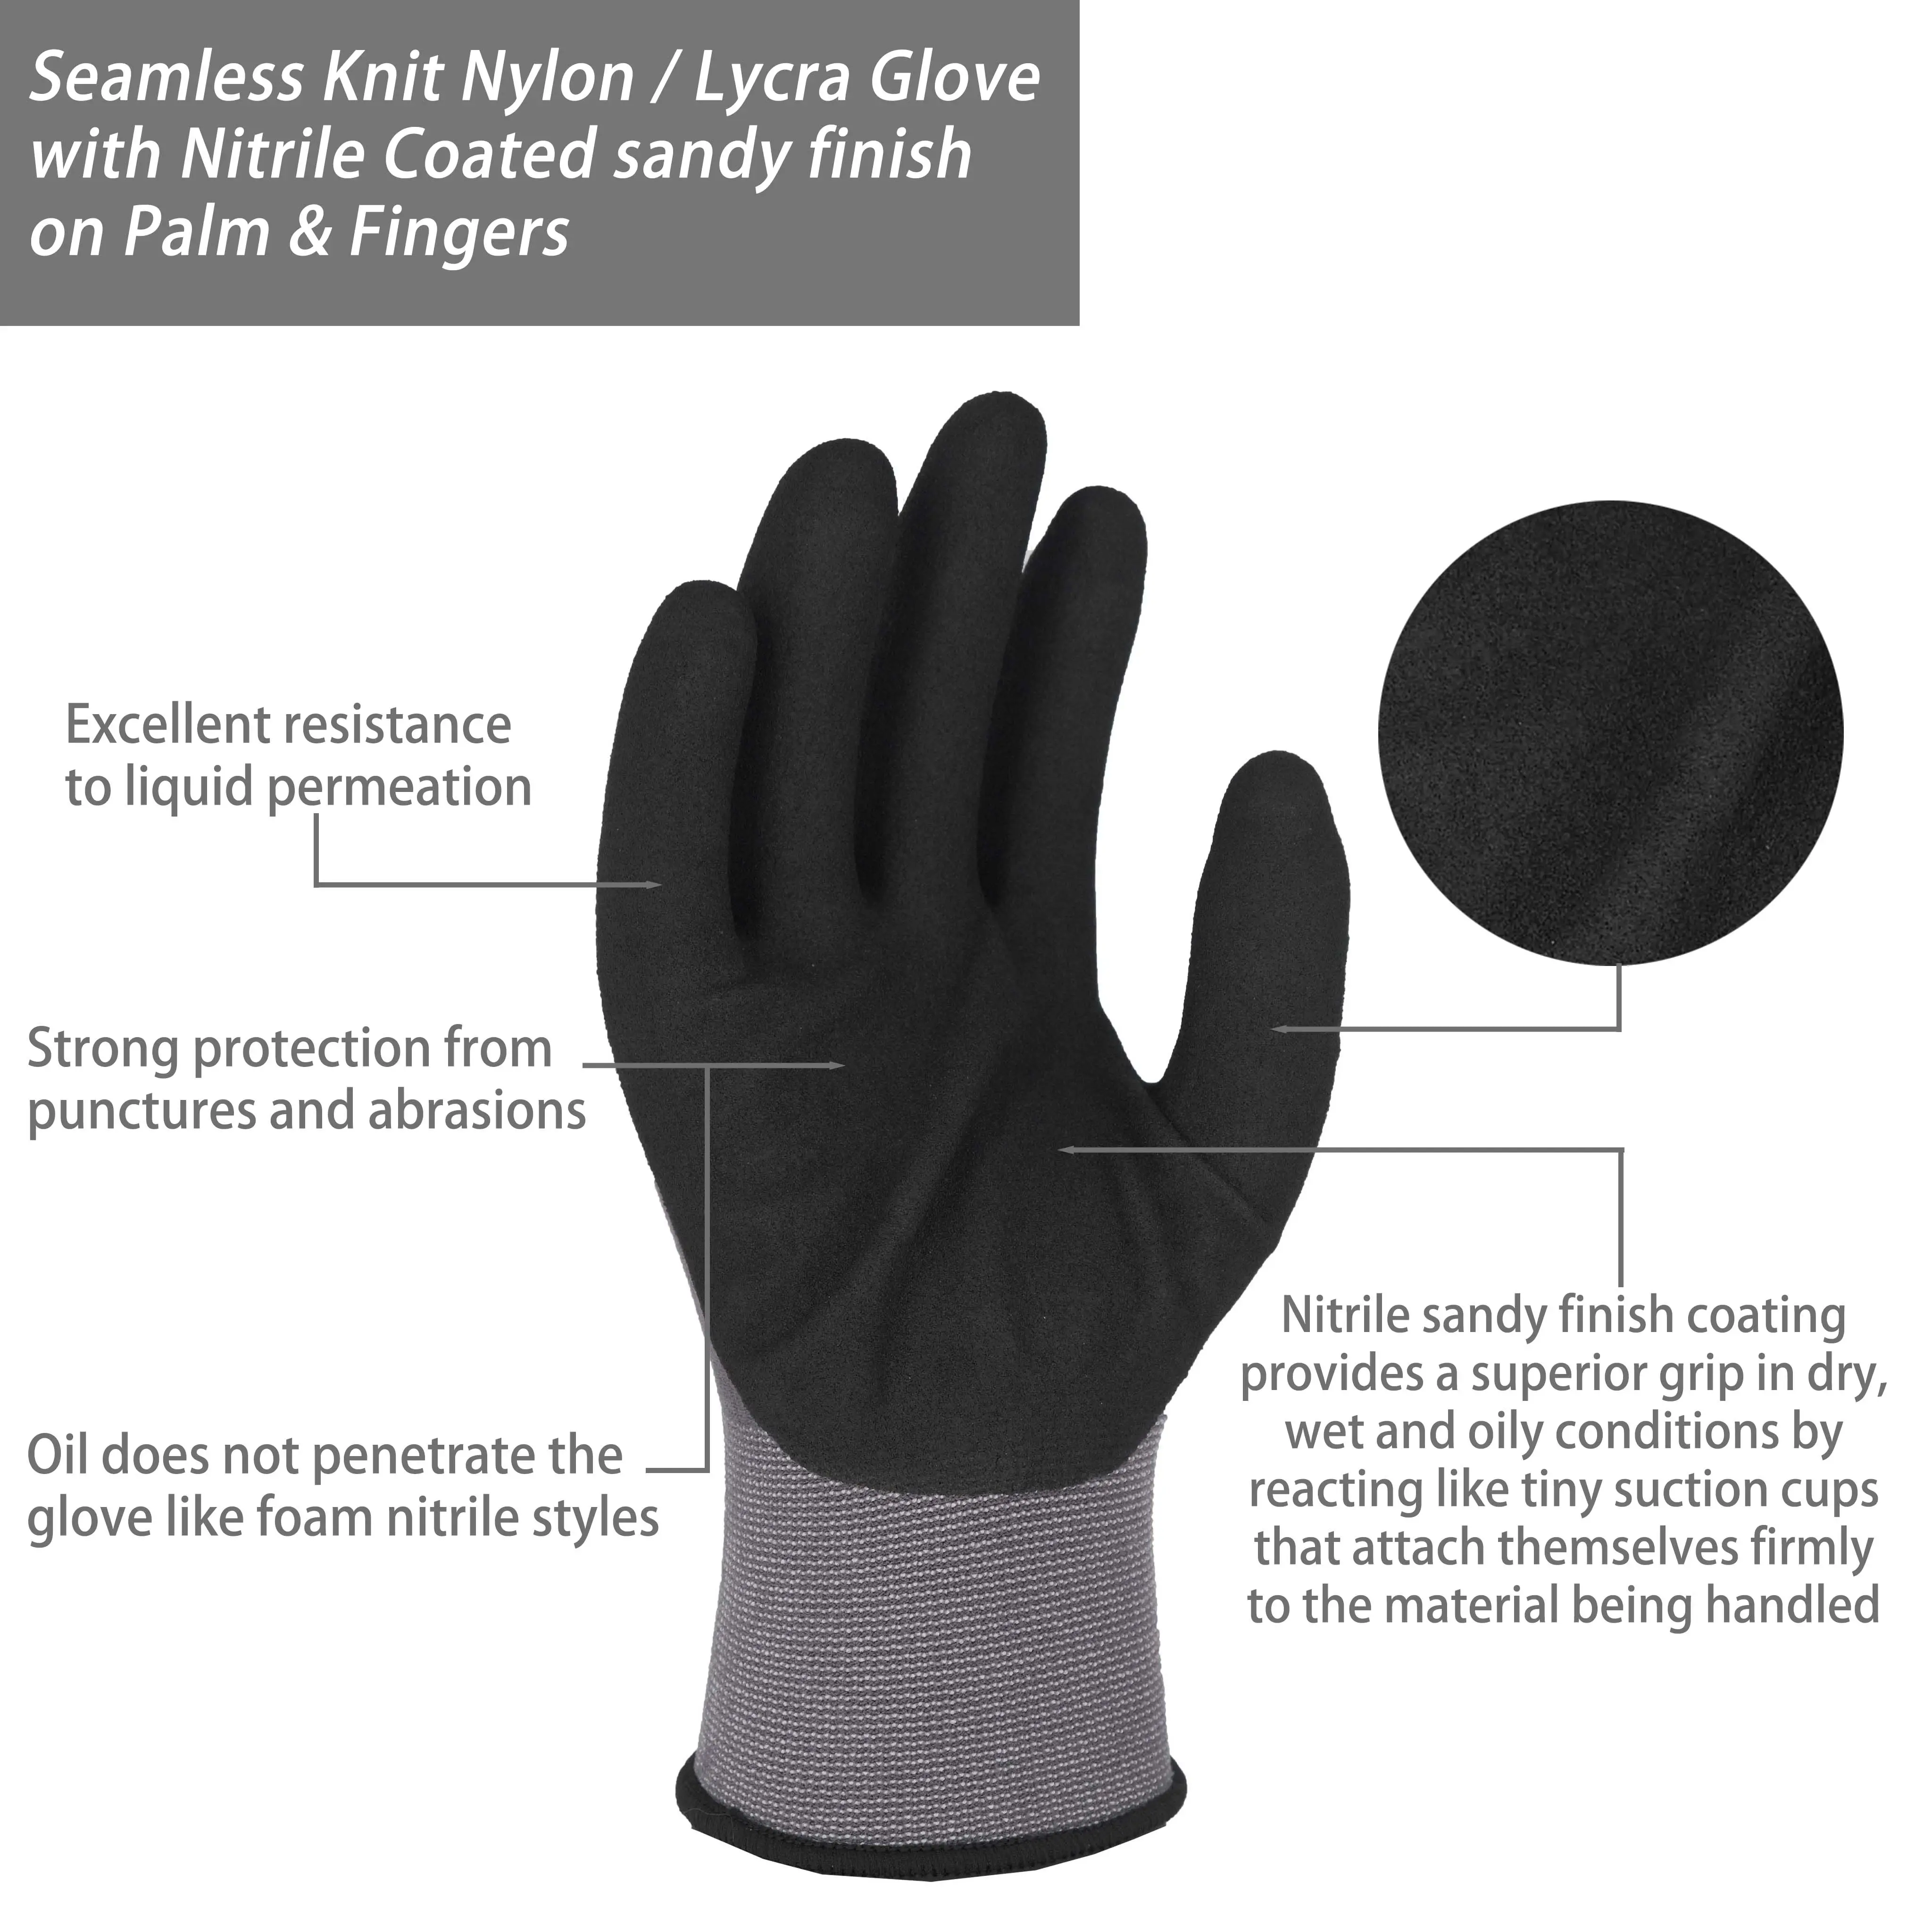 SKYEE anti-abrasion nylon oil proof construction gardening glove with nitrile gloves industrial